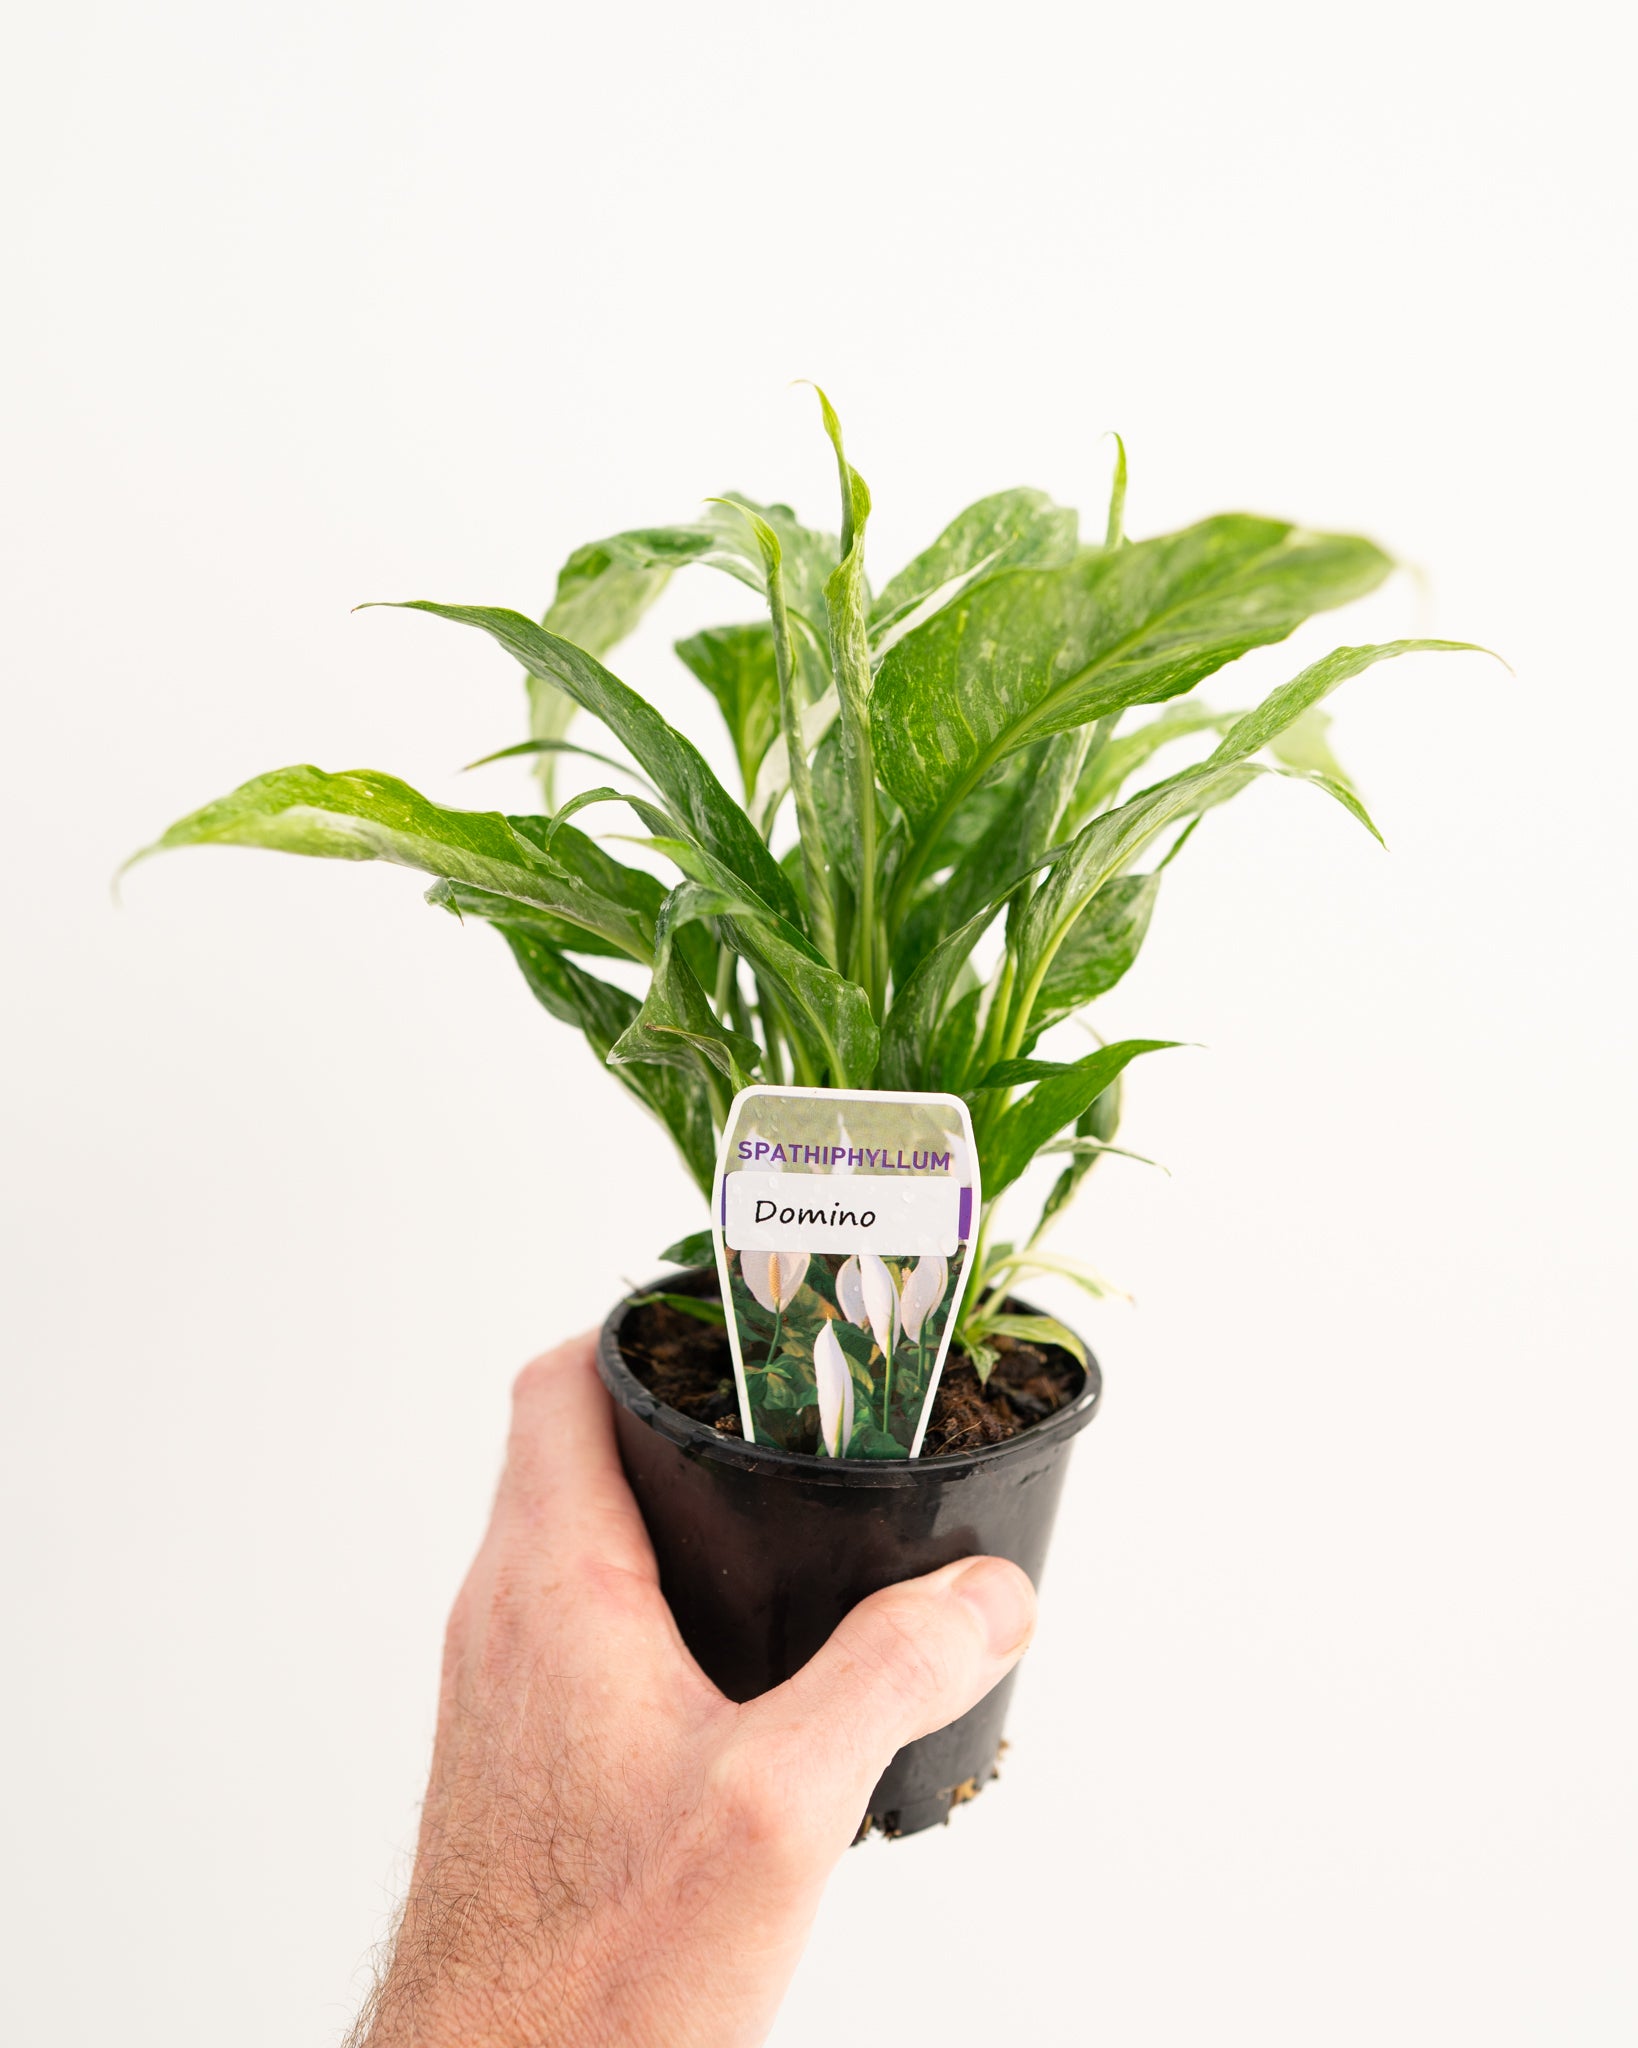 Spathiphyllum 'Domino' (Domino Peace Lily)